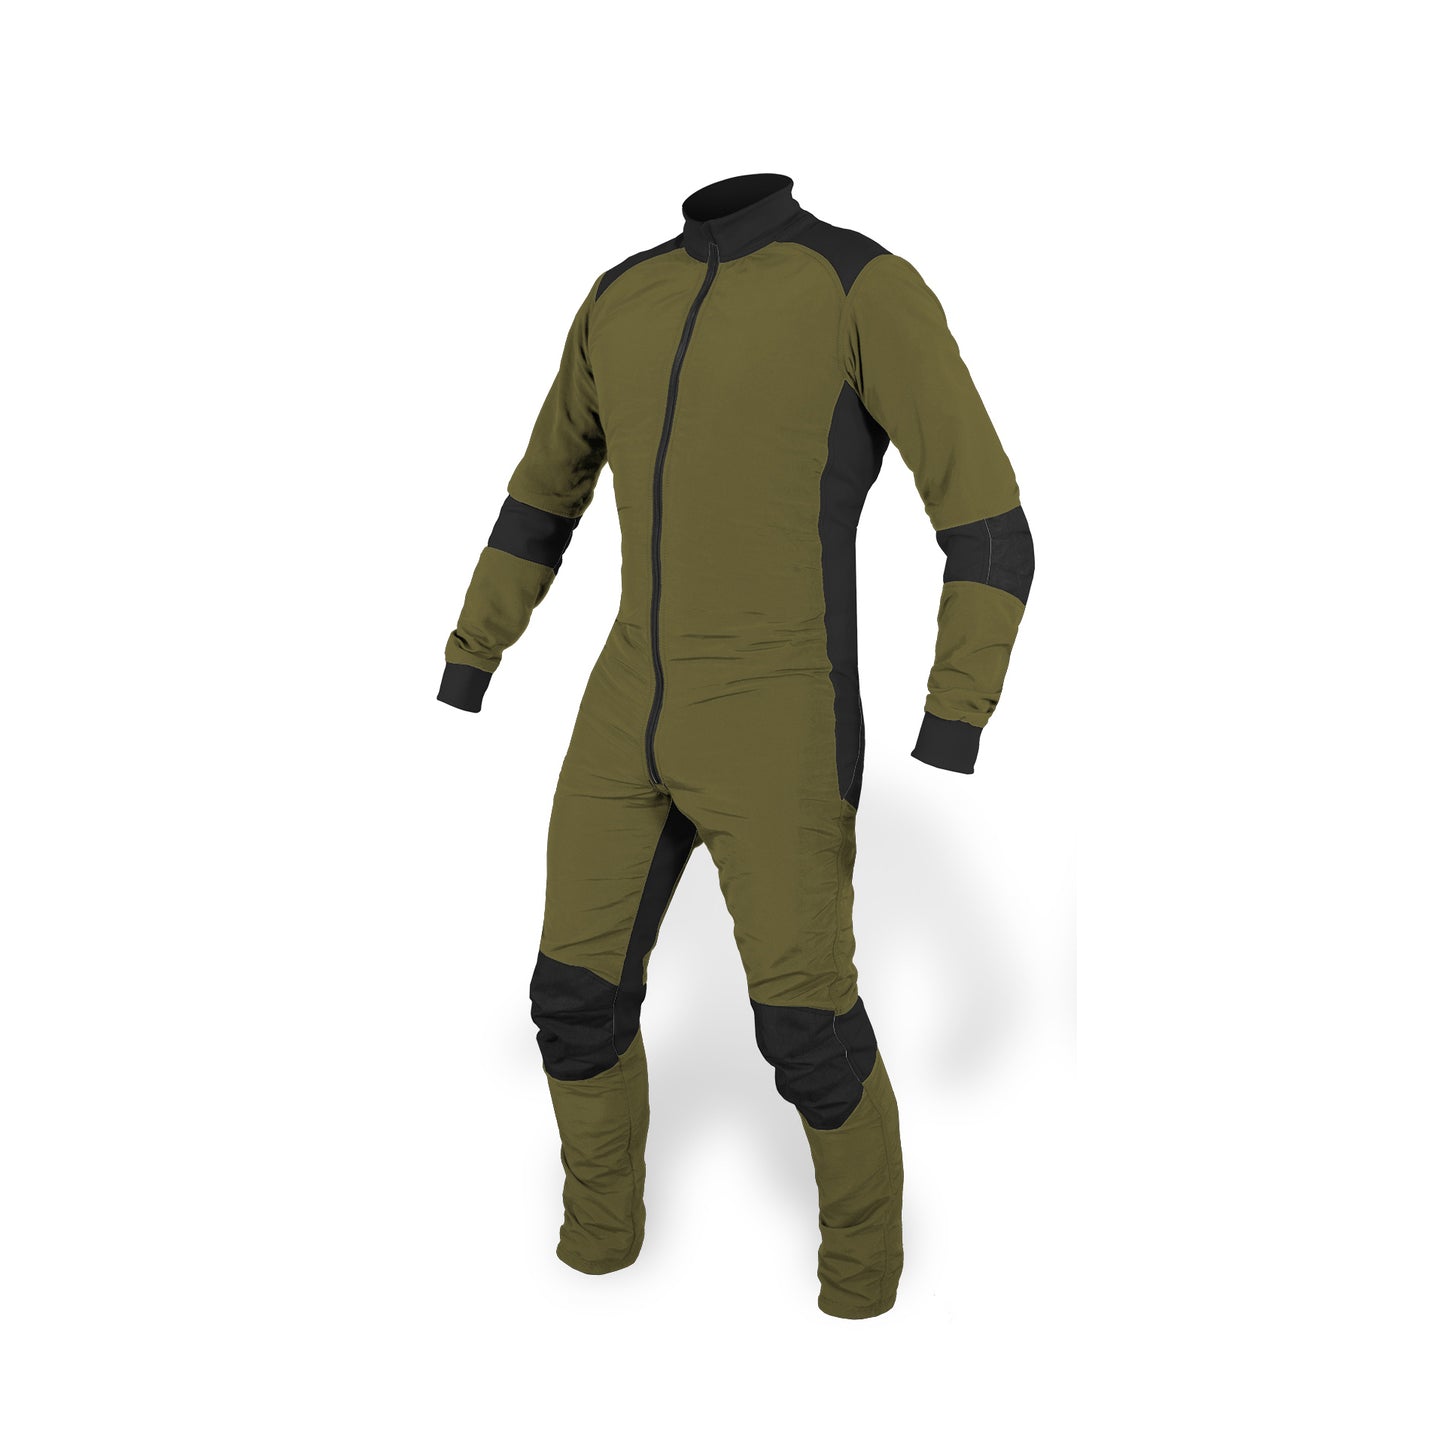 Freefly Skydiving Suit Olive Green SE-03